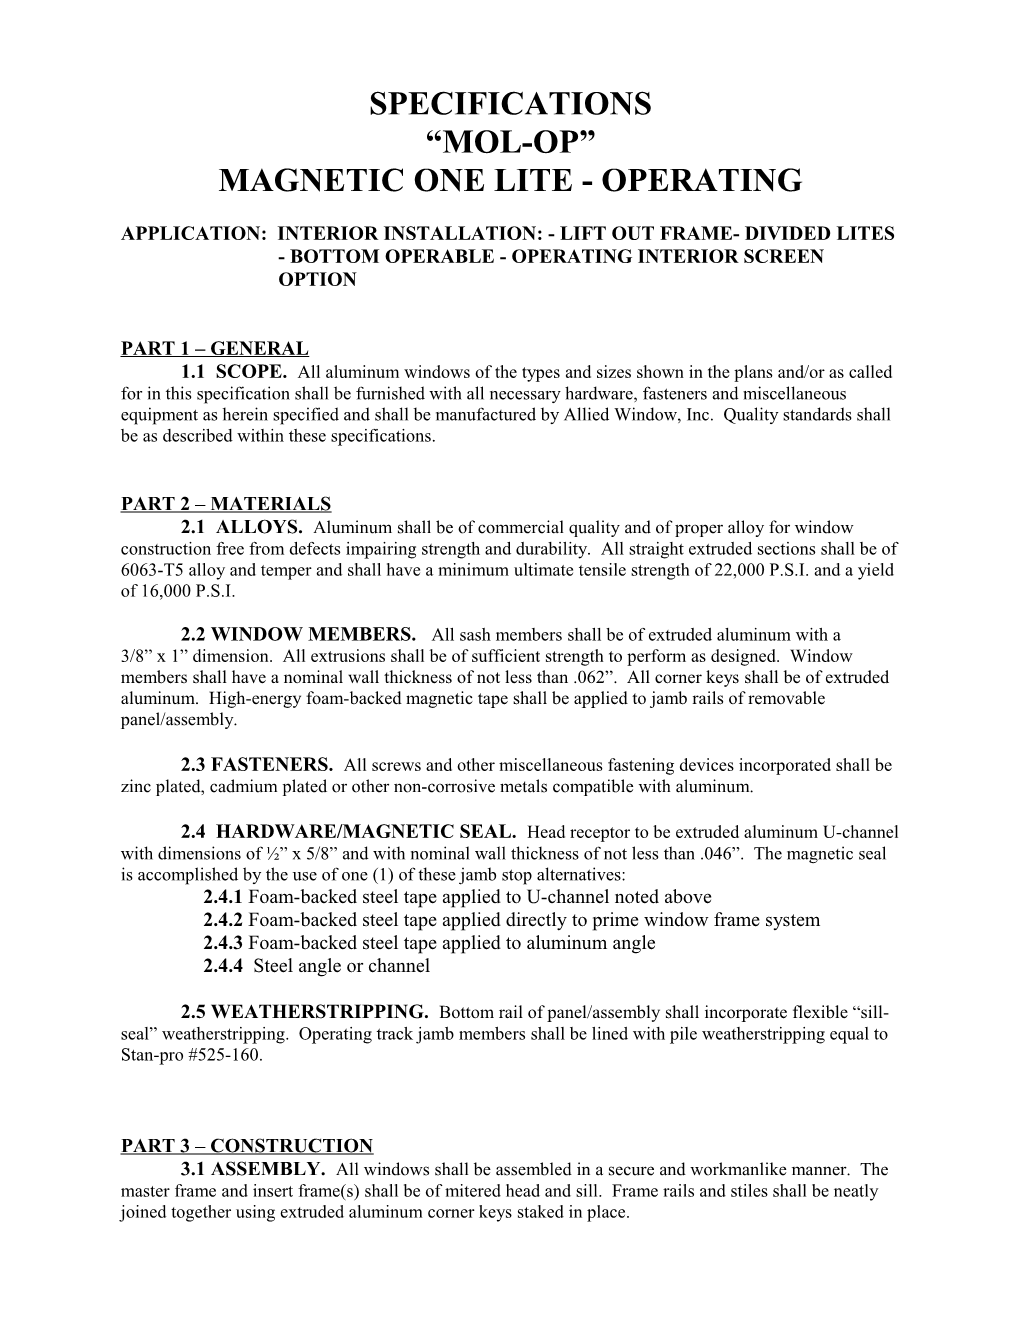 Magnetic One Lite - Operating